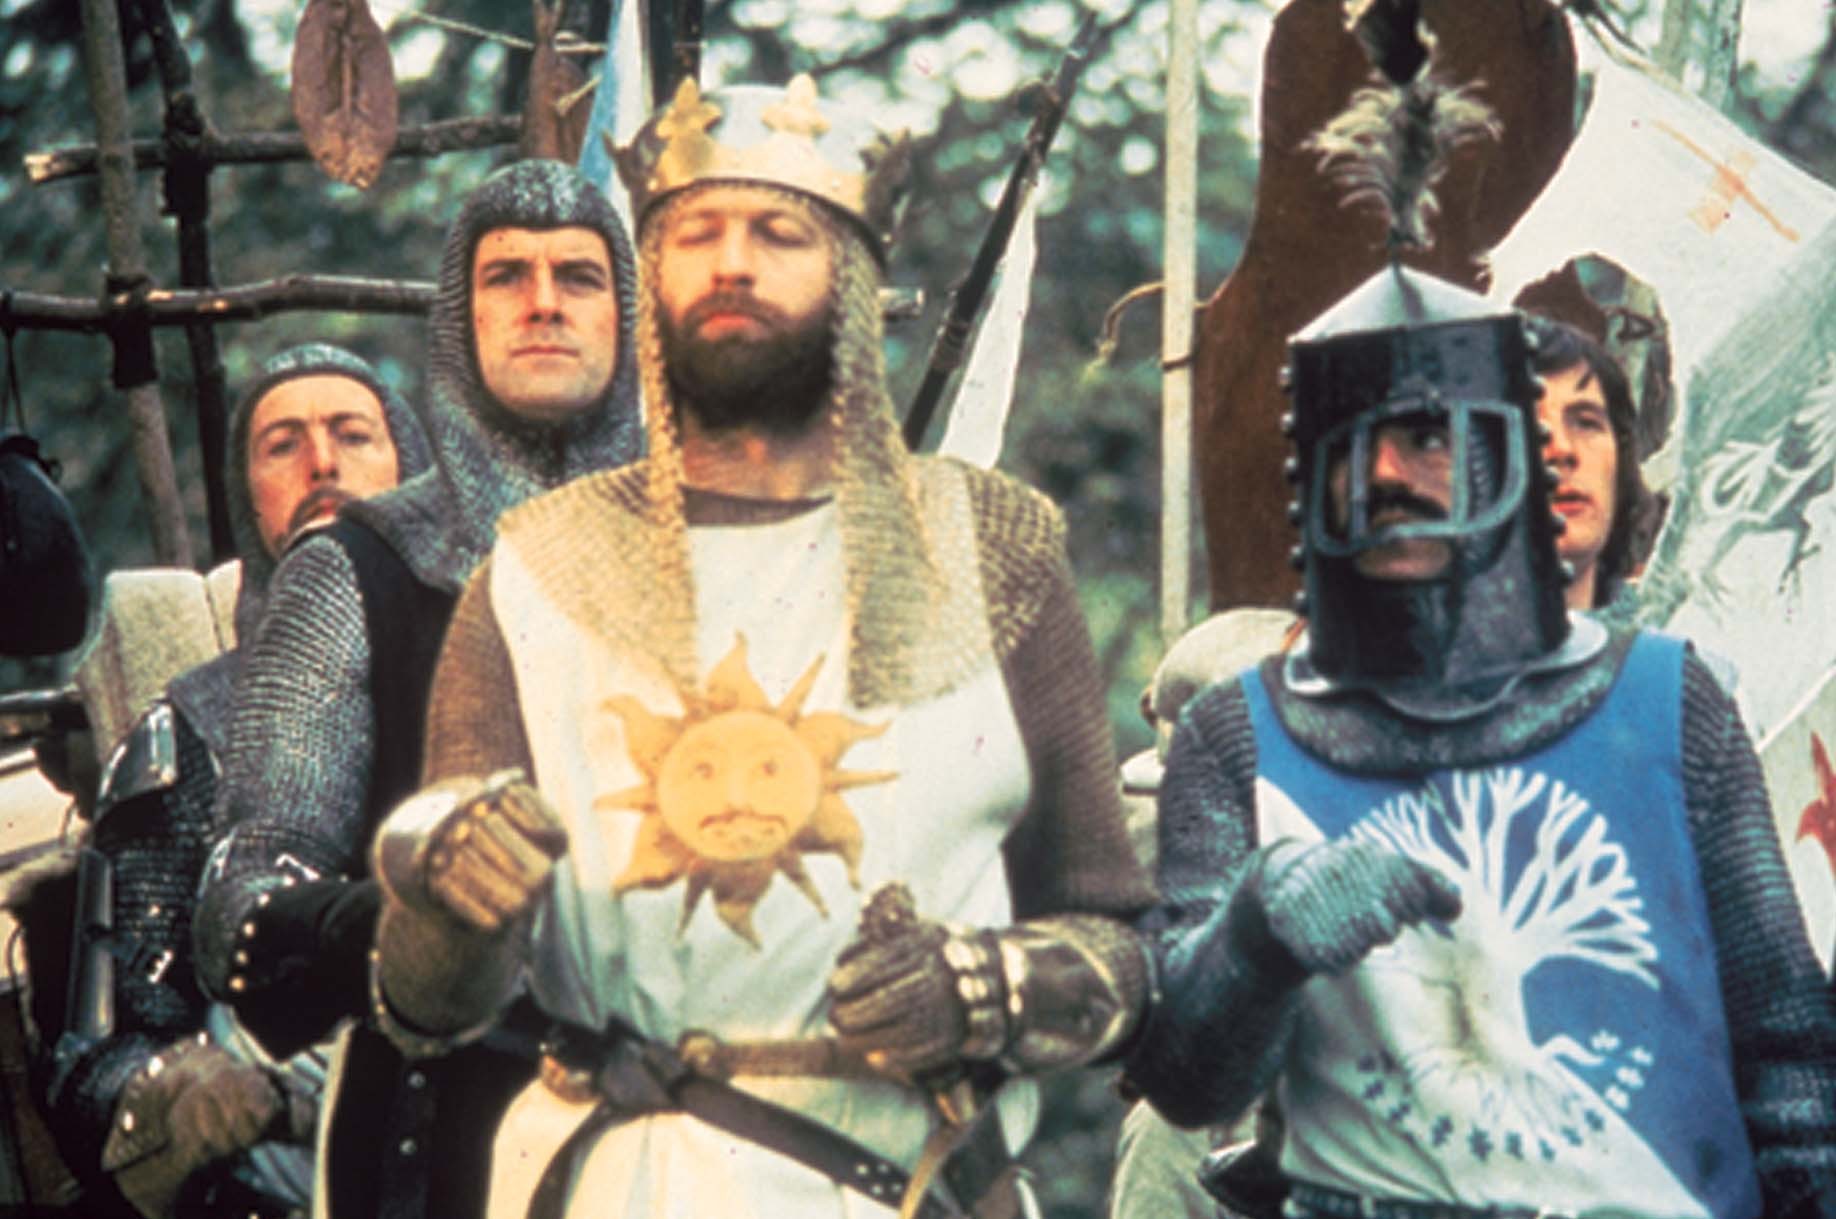 Monty Python’s The Holy Grail and The Meaning Of Life – Double Feature Review